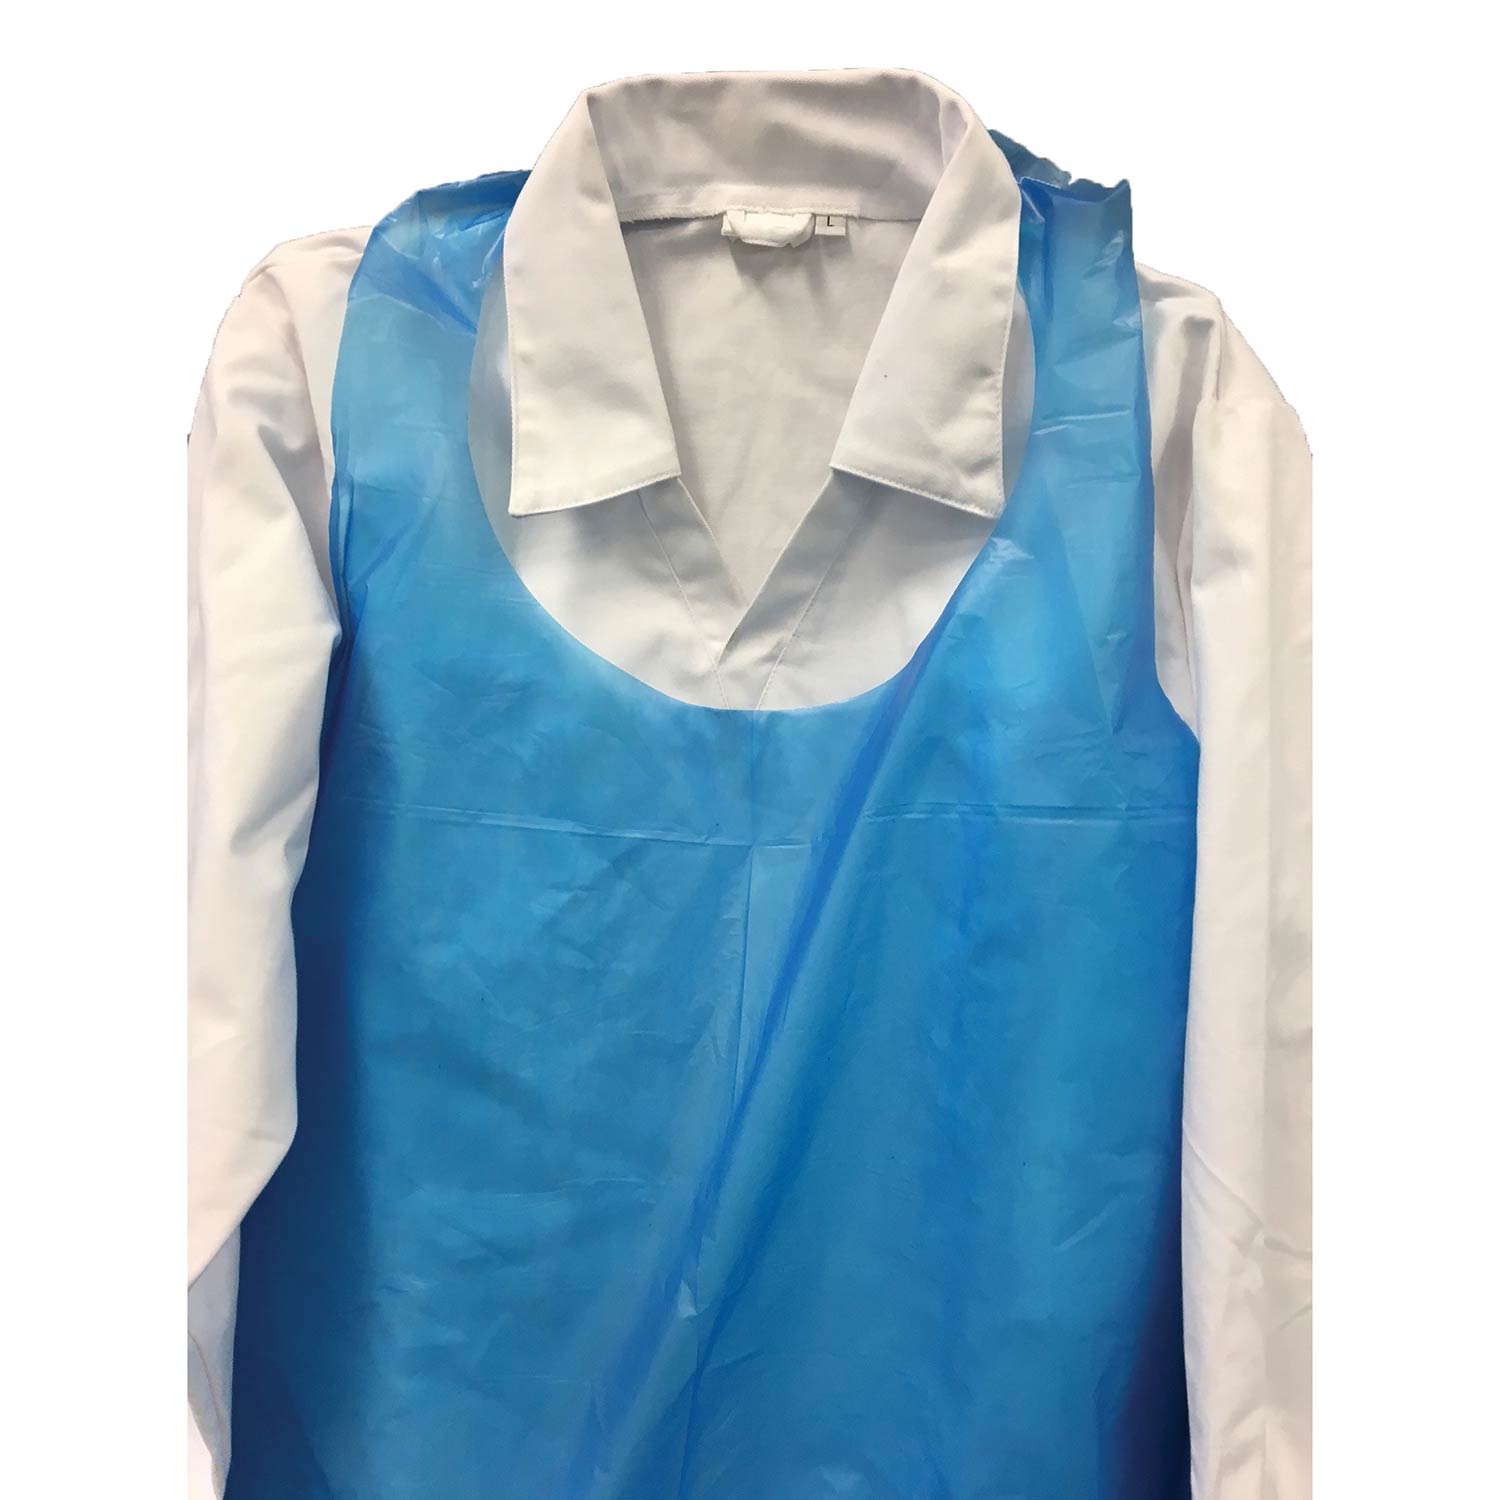 Allcare Disposable Apron - CT/500 Safety & PPE  